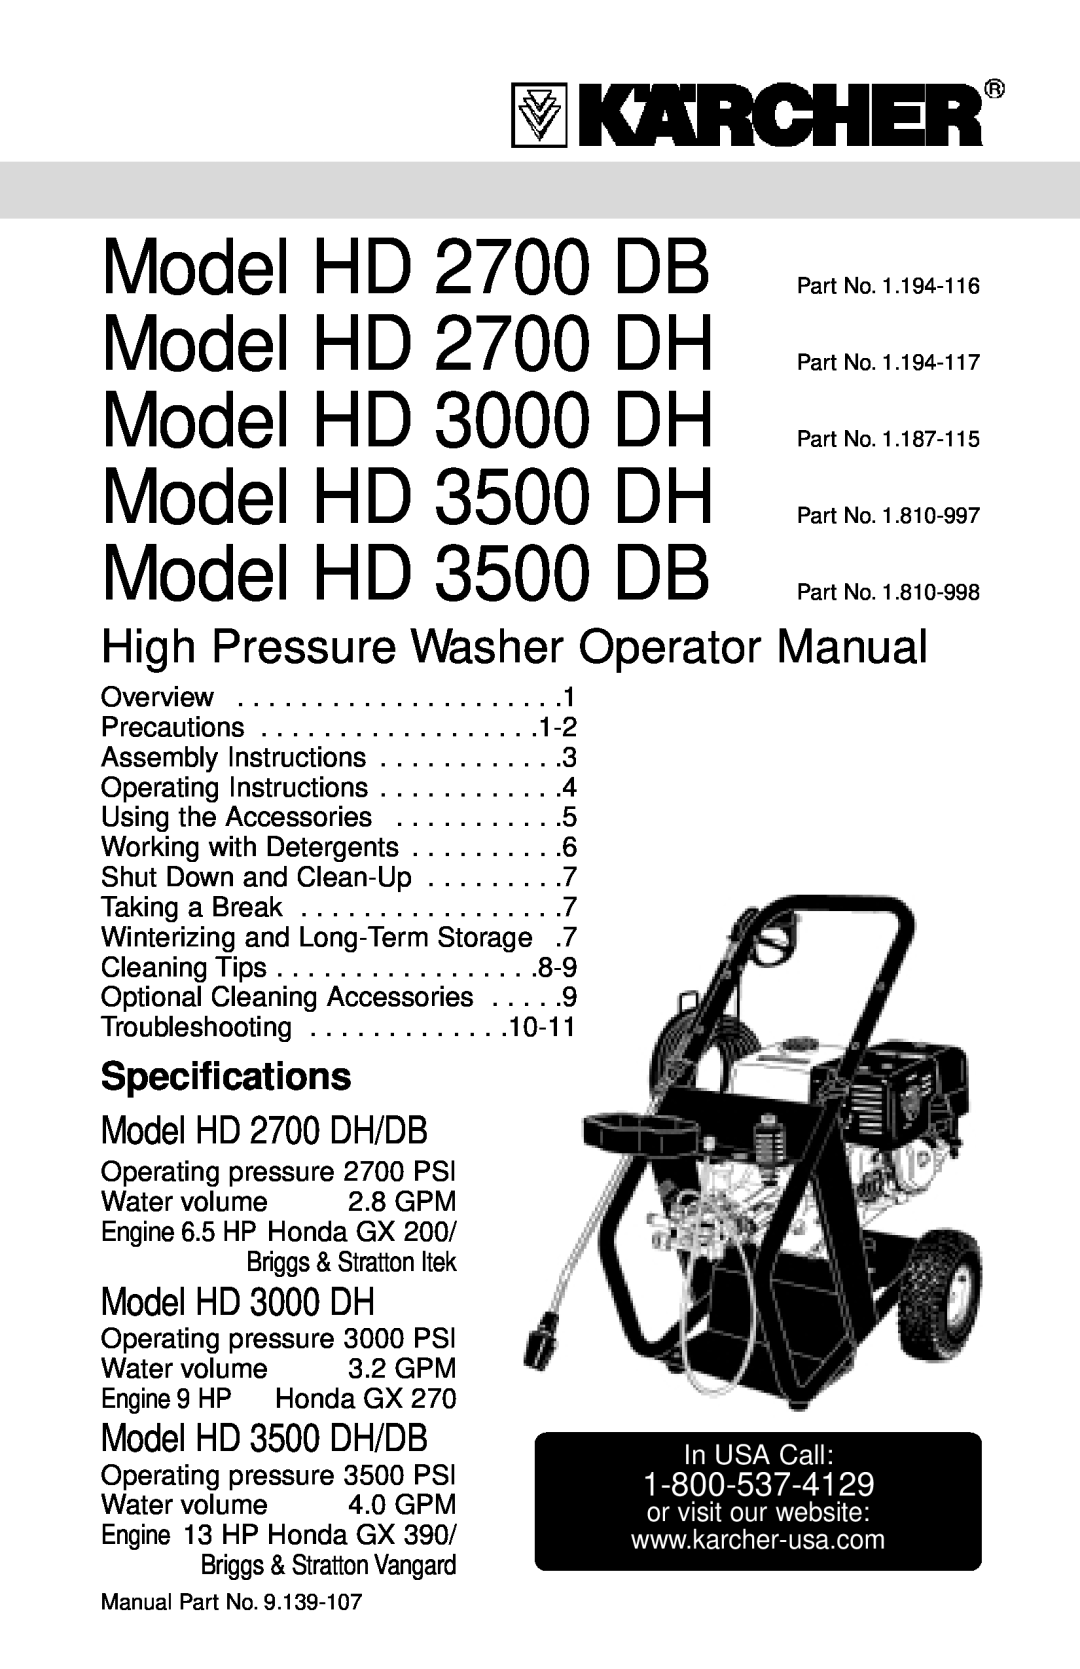 Karcher HD 2700 DB specifications In USA Call, or visit our website, Model HD 3500 DB, Specifications, Model HD 2700 DH/DB 